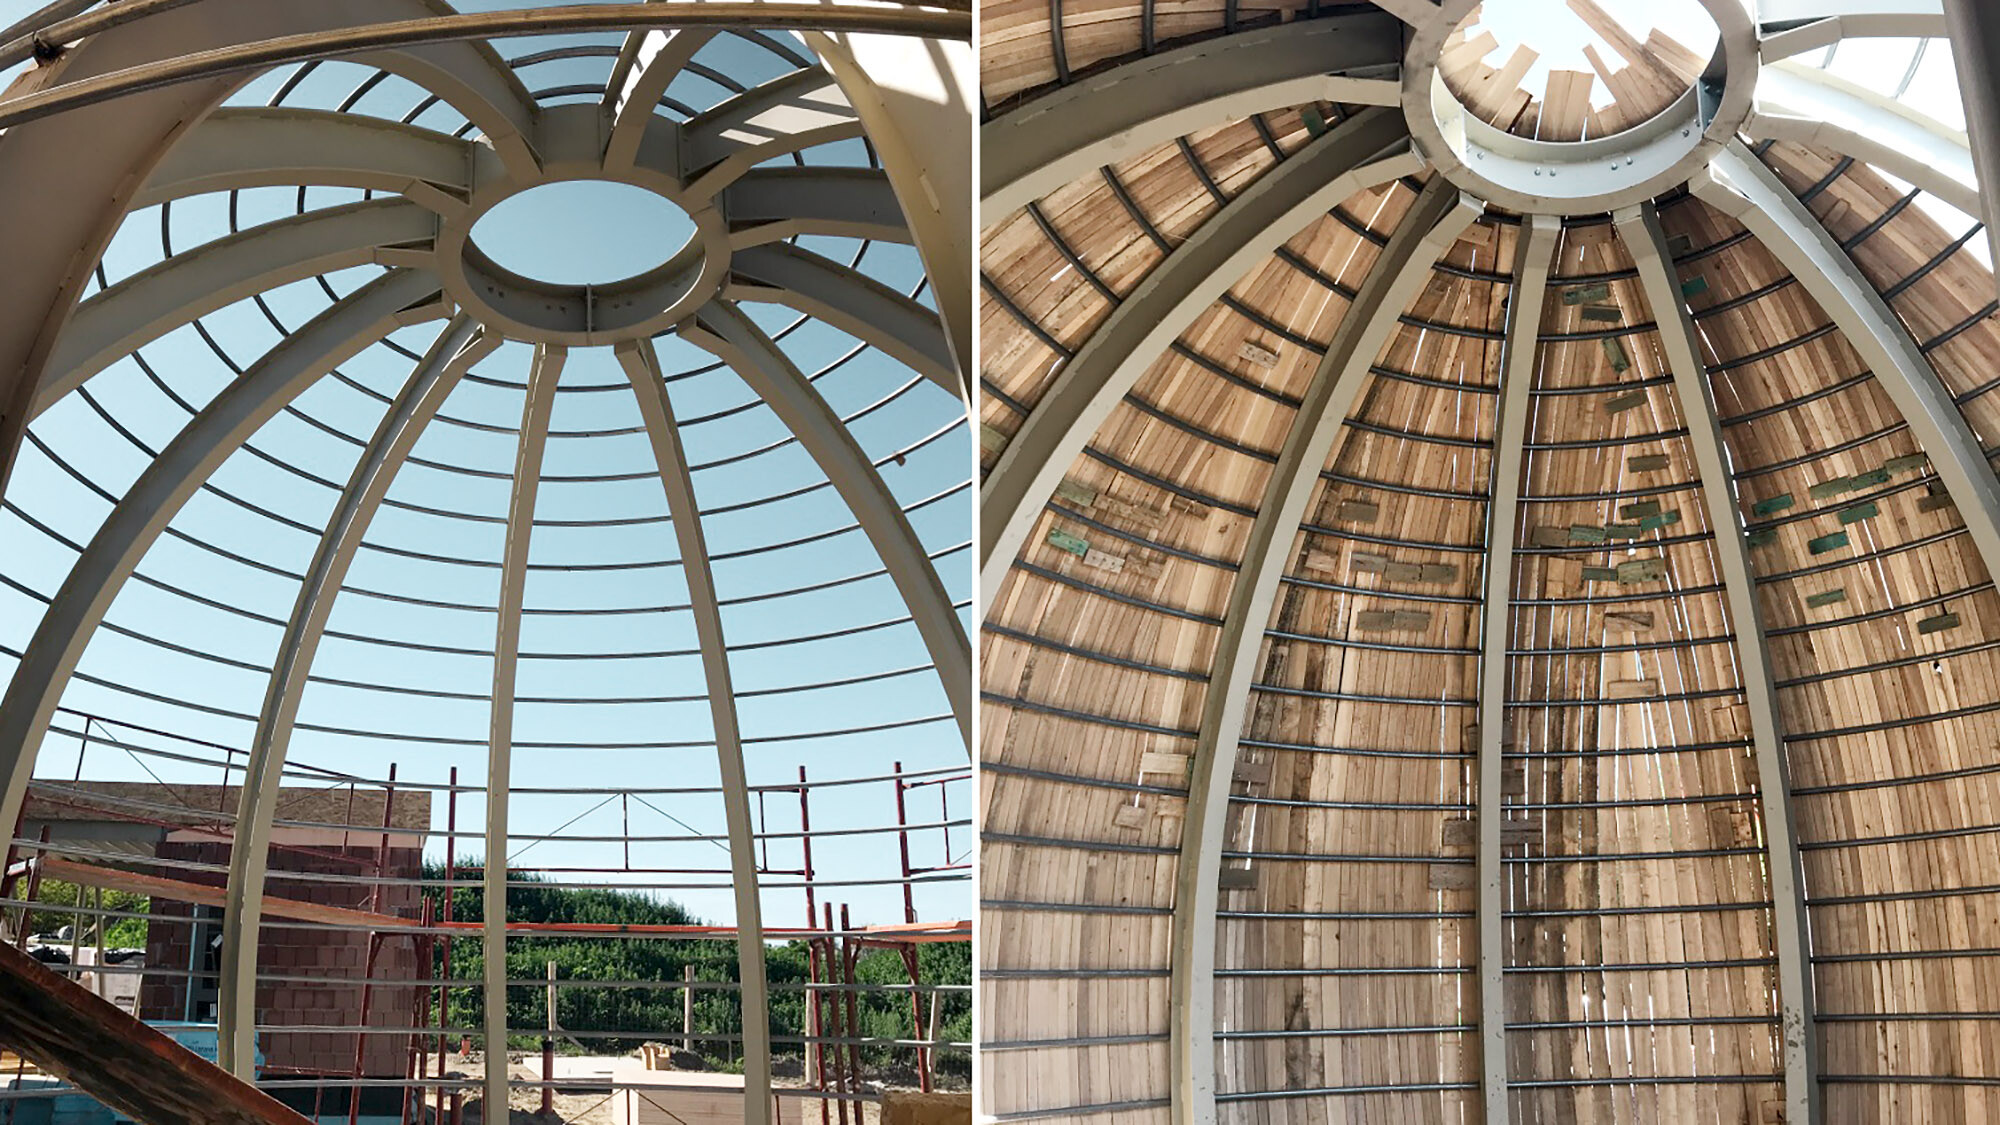 Two construction site photos with interior views of one of the round rooms: on the left, the naked steel skeleton, on the right, the steel skeleton clad in bent poplar wood.